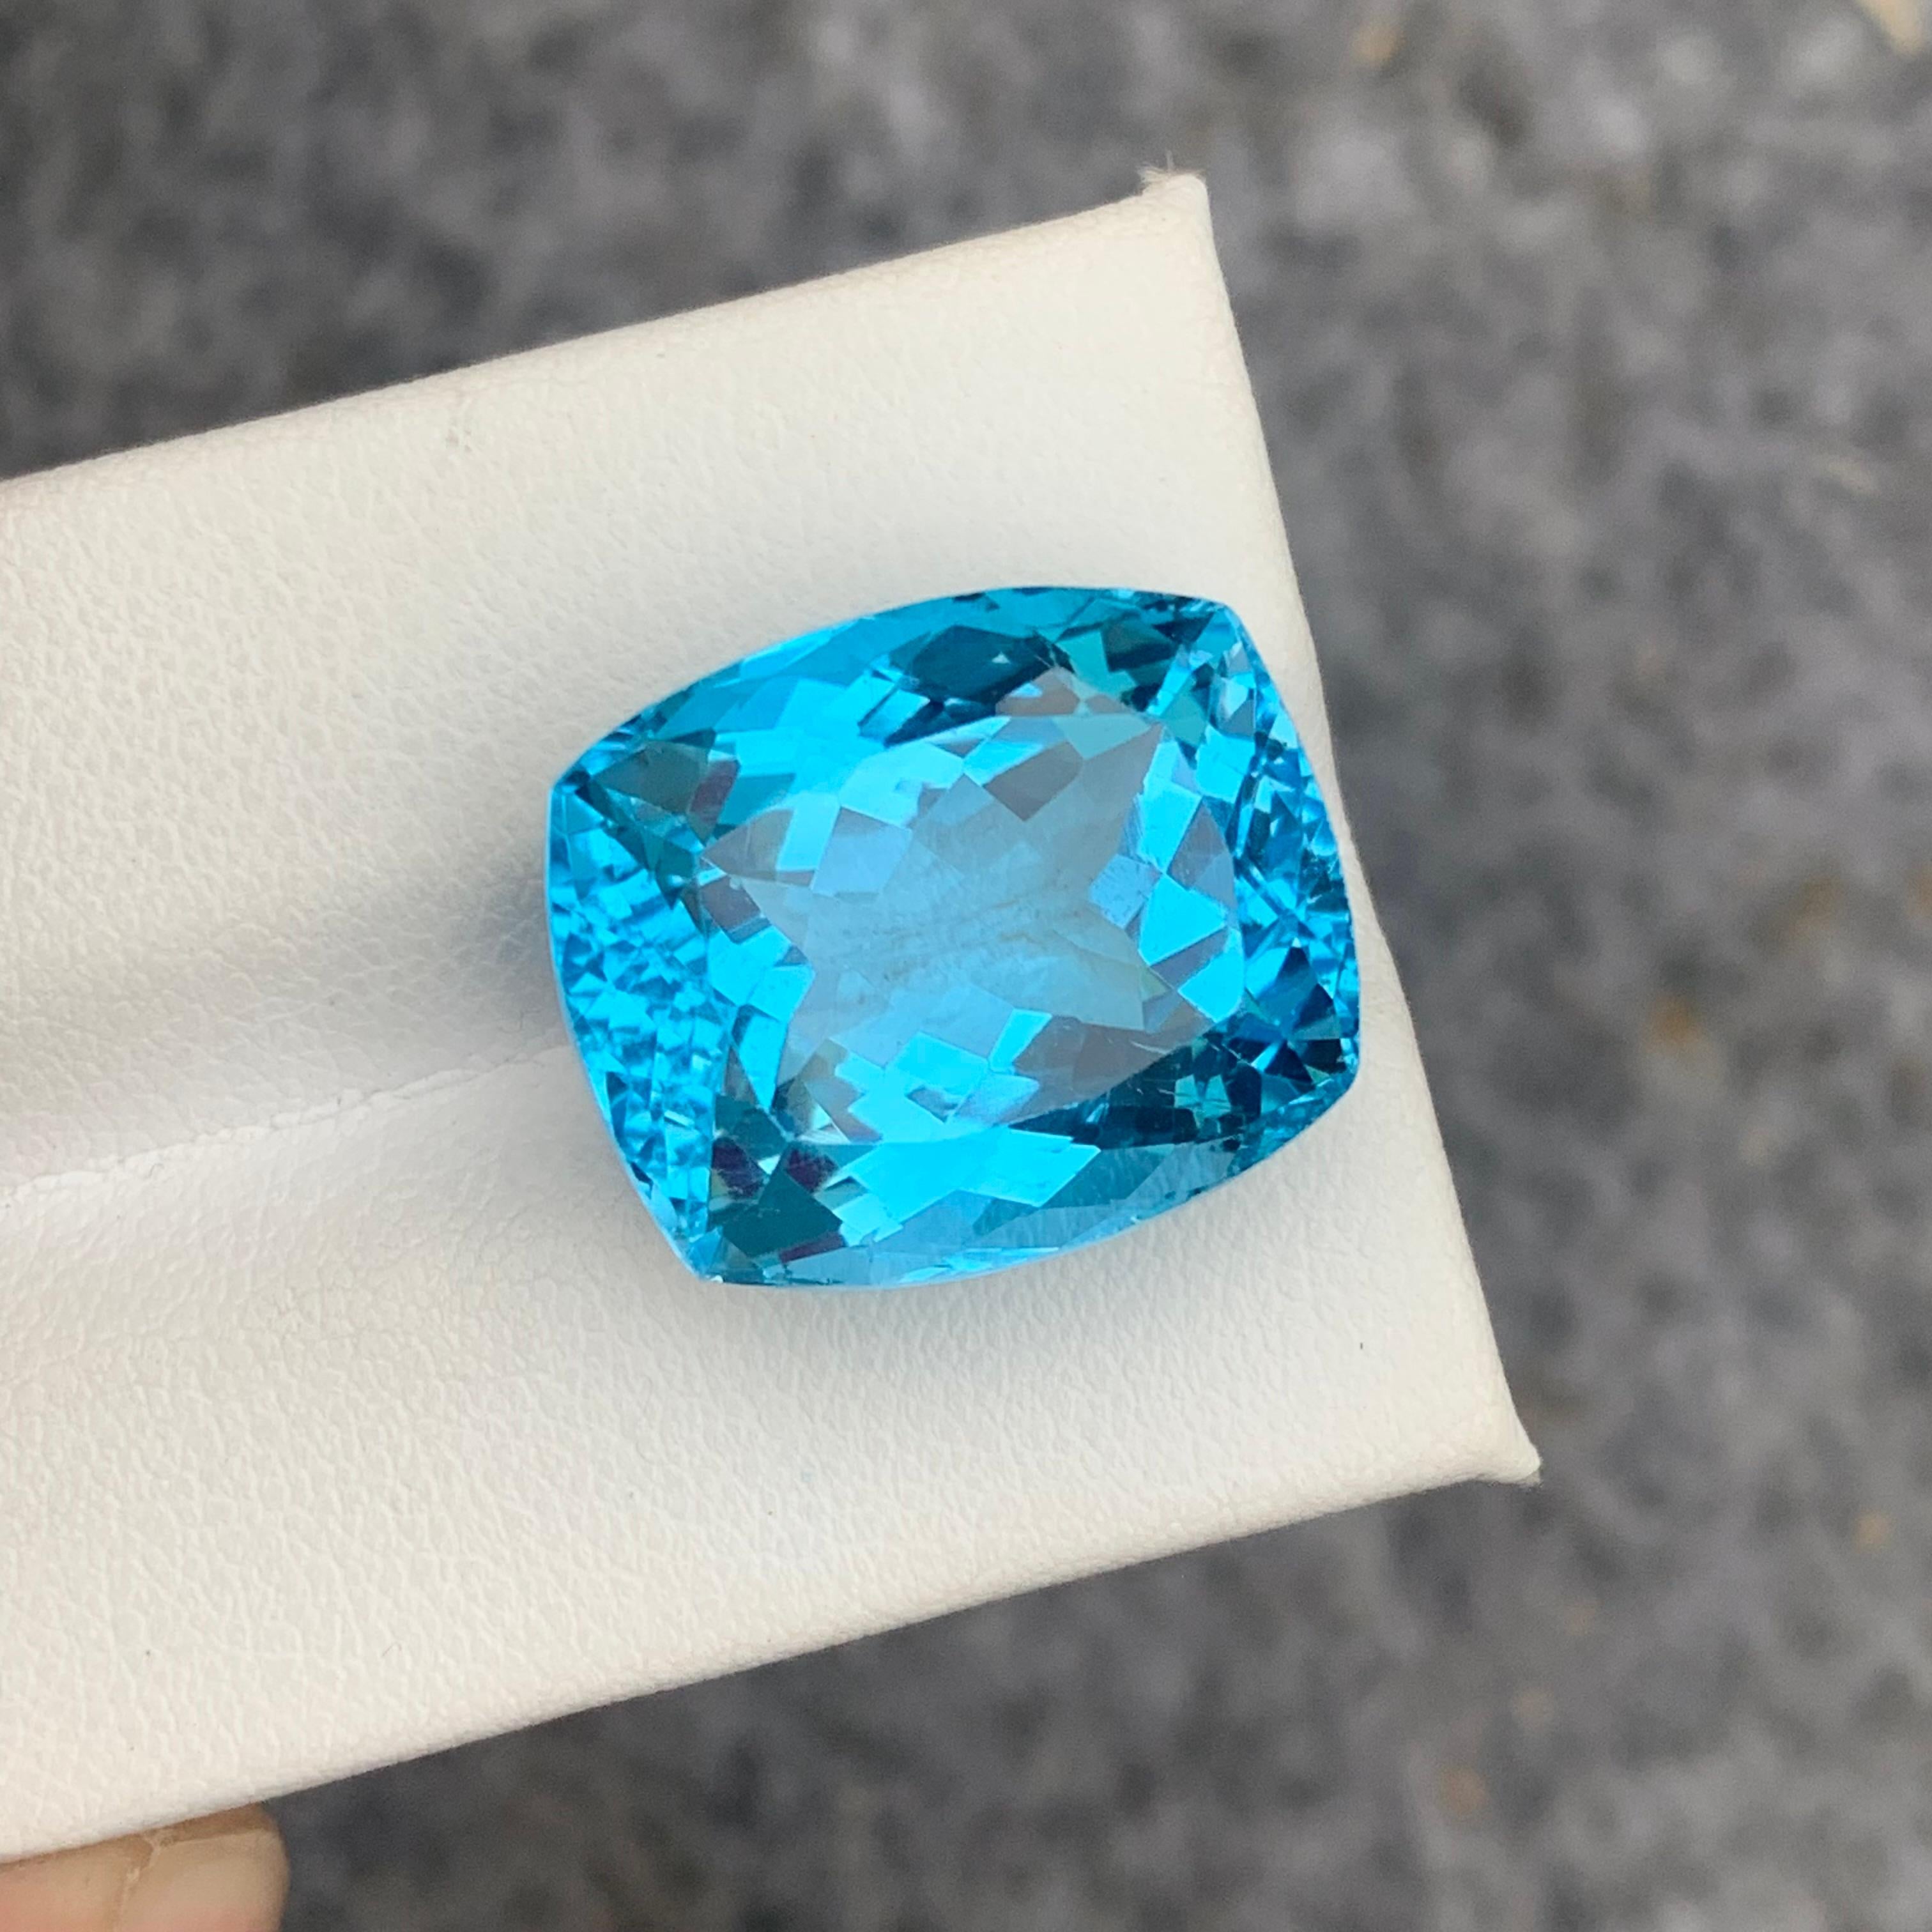 Gorgeous 31.10 Carat Loose Blue Topaz from Brazil Long Cushion Cut for Jewelry 9